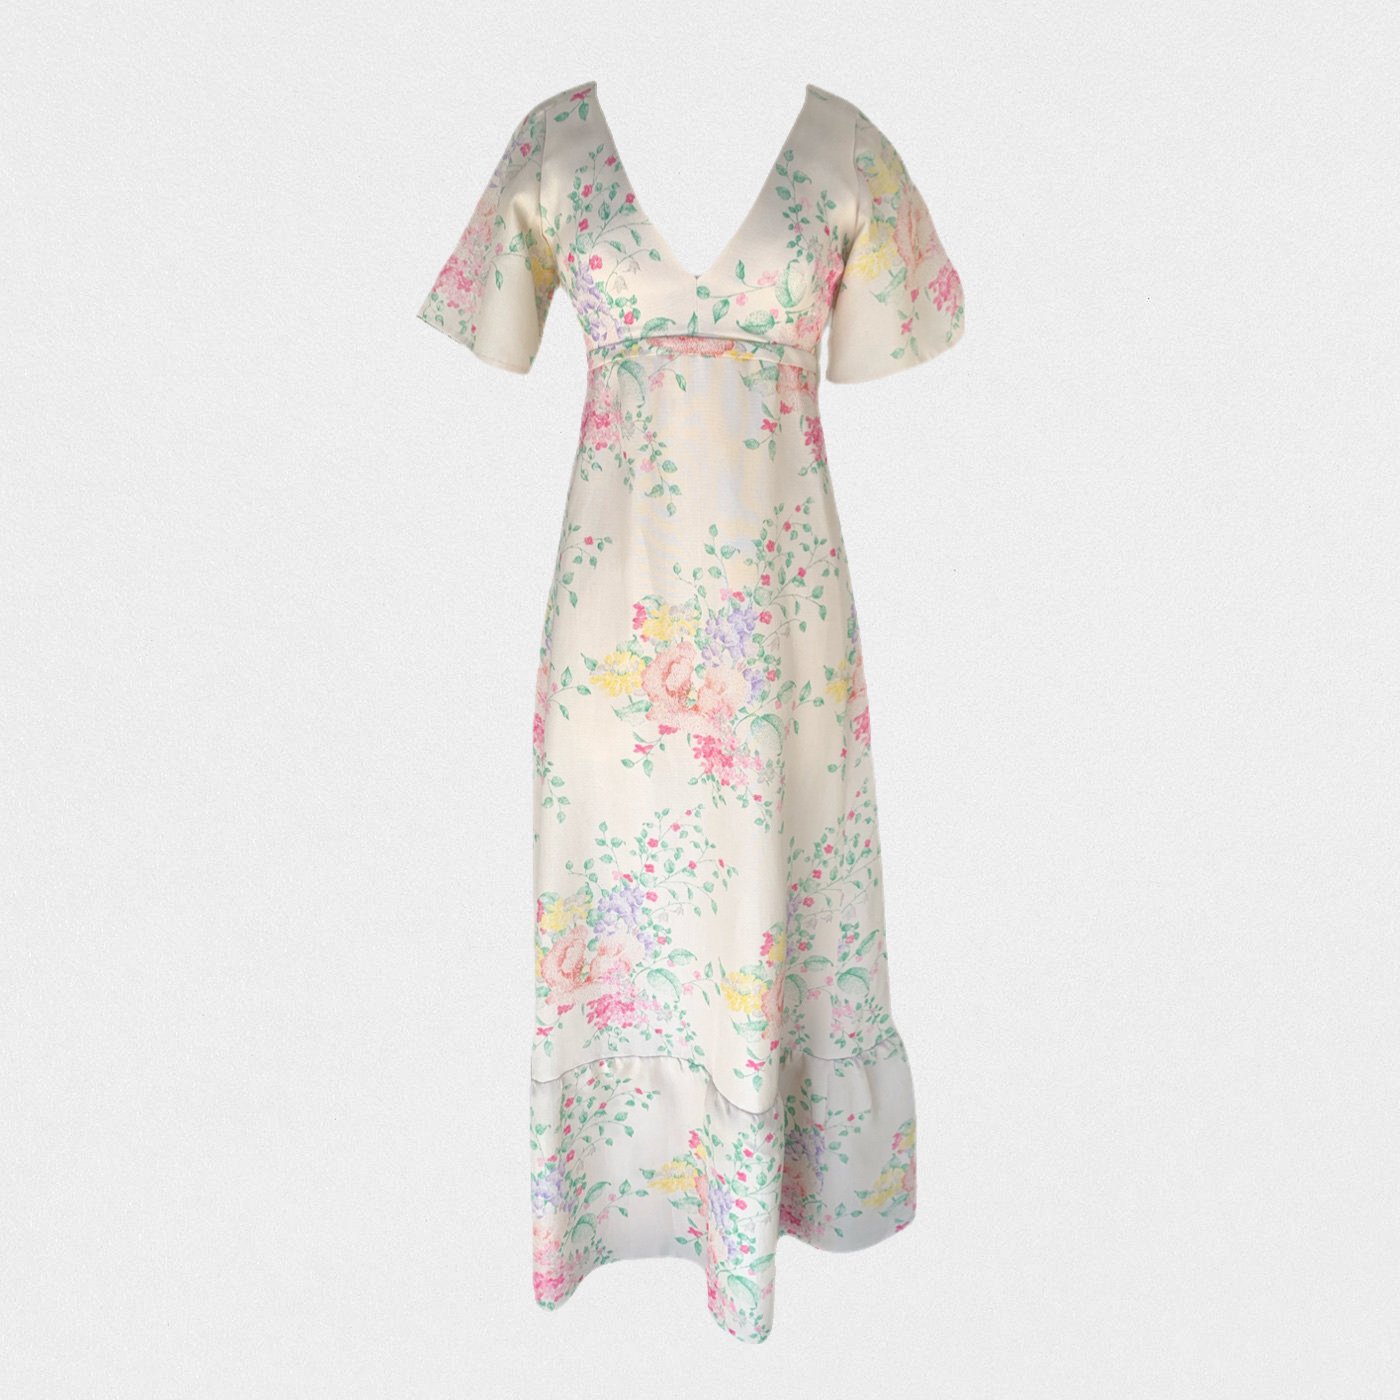 Lysis vintage Givenchy dress - S - 1970s